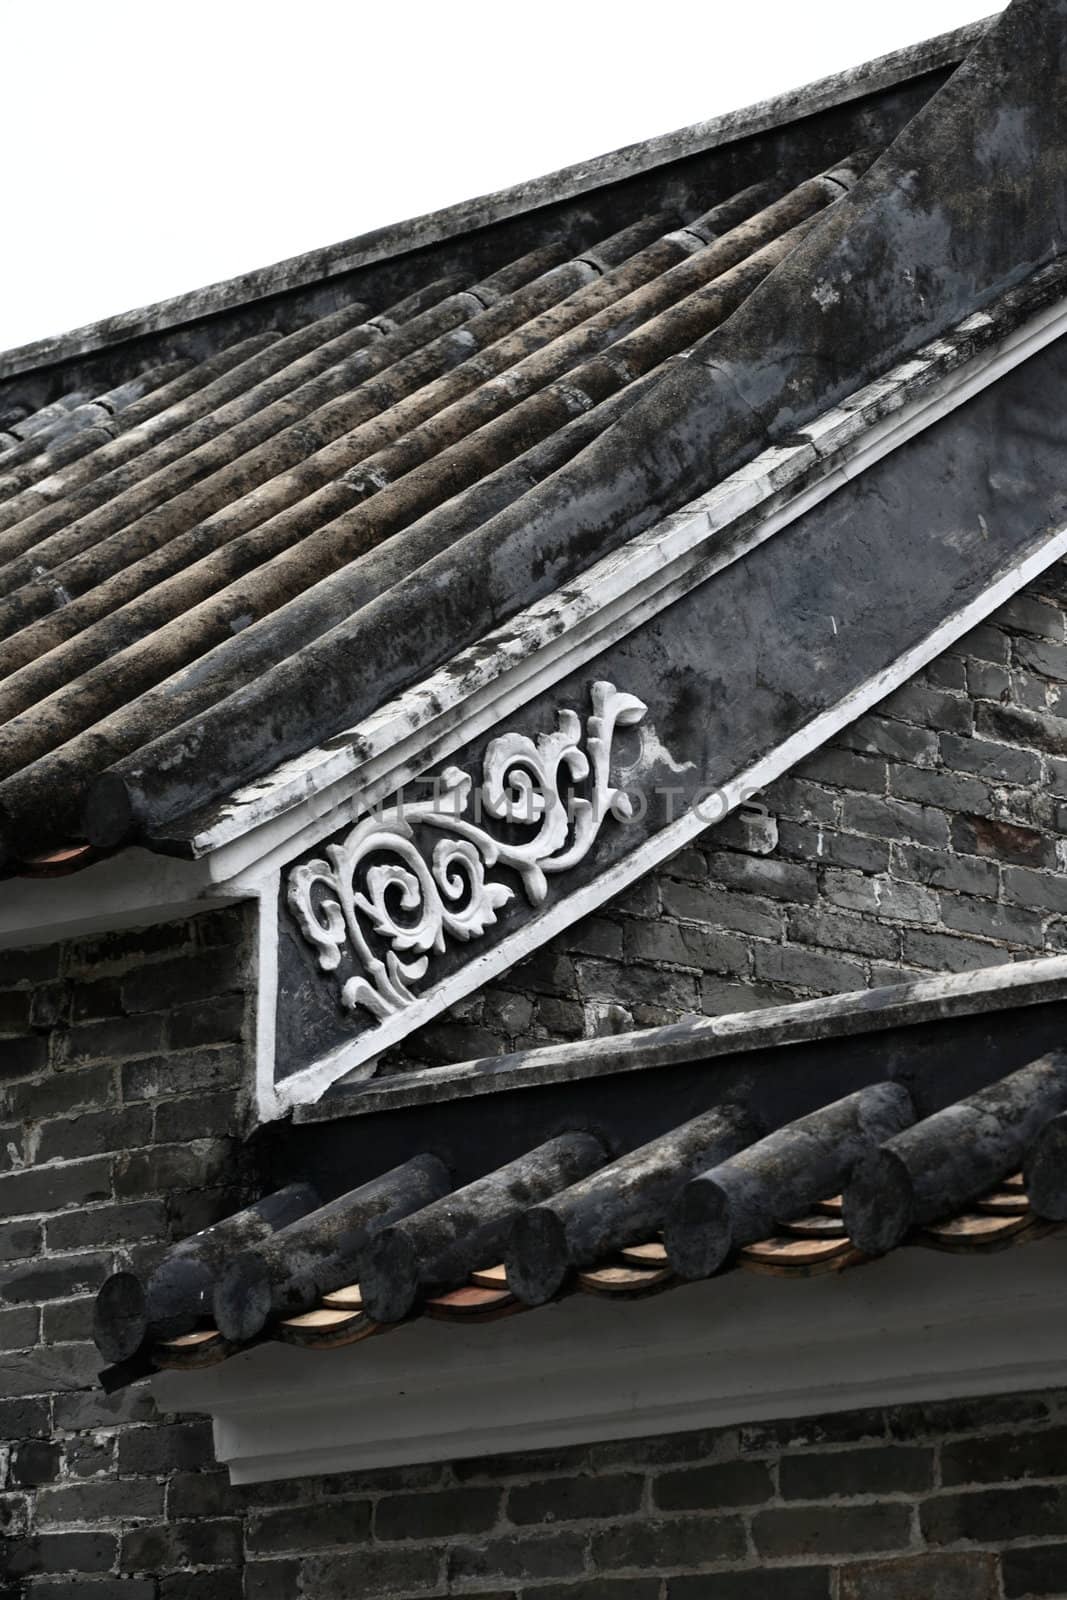 chinese building roof